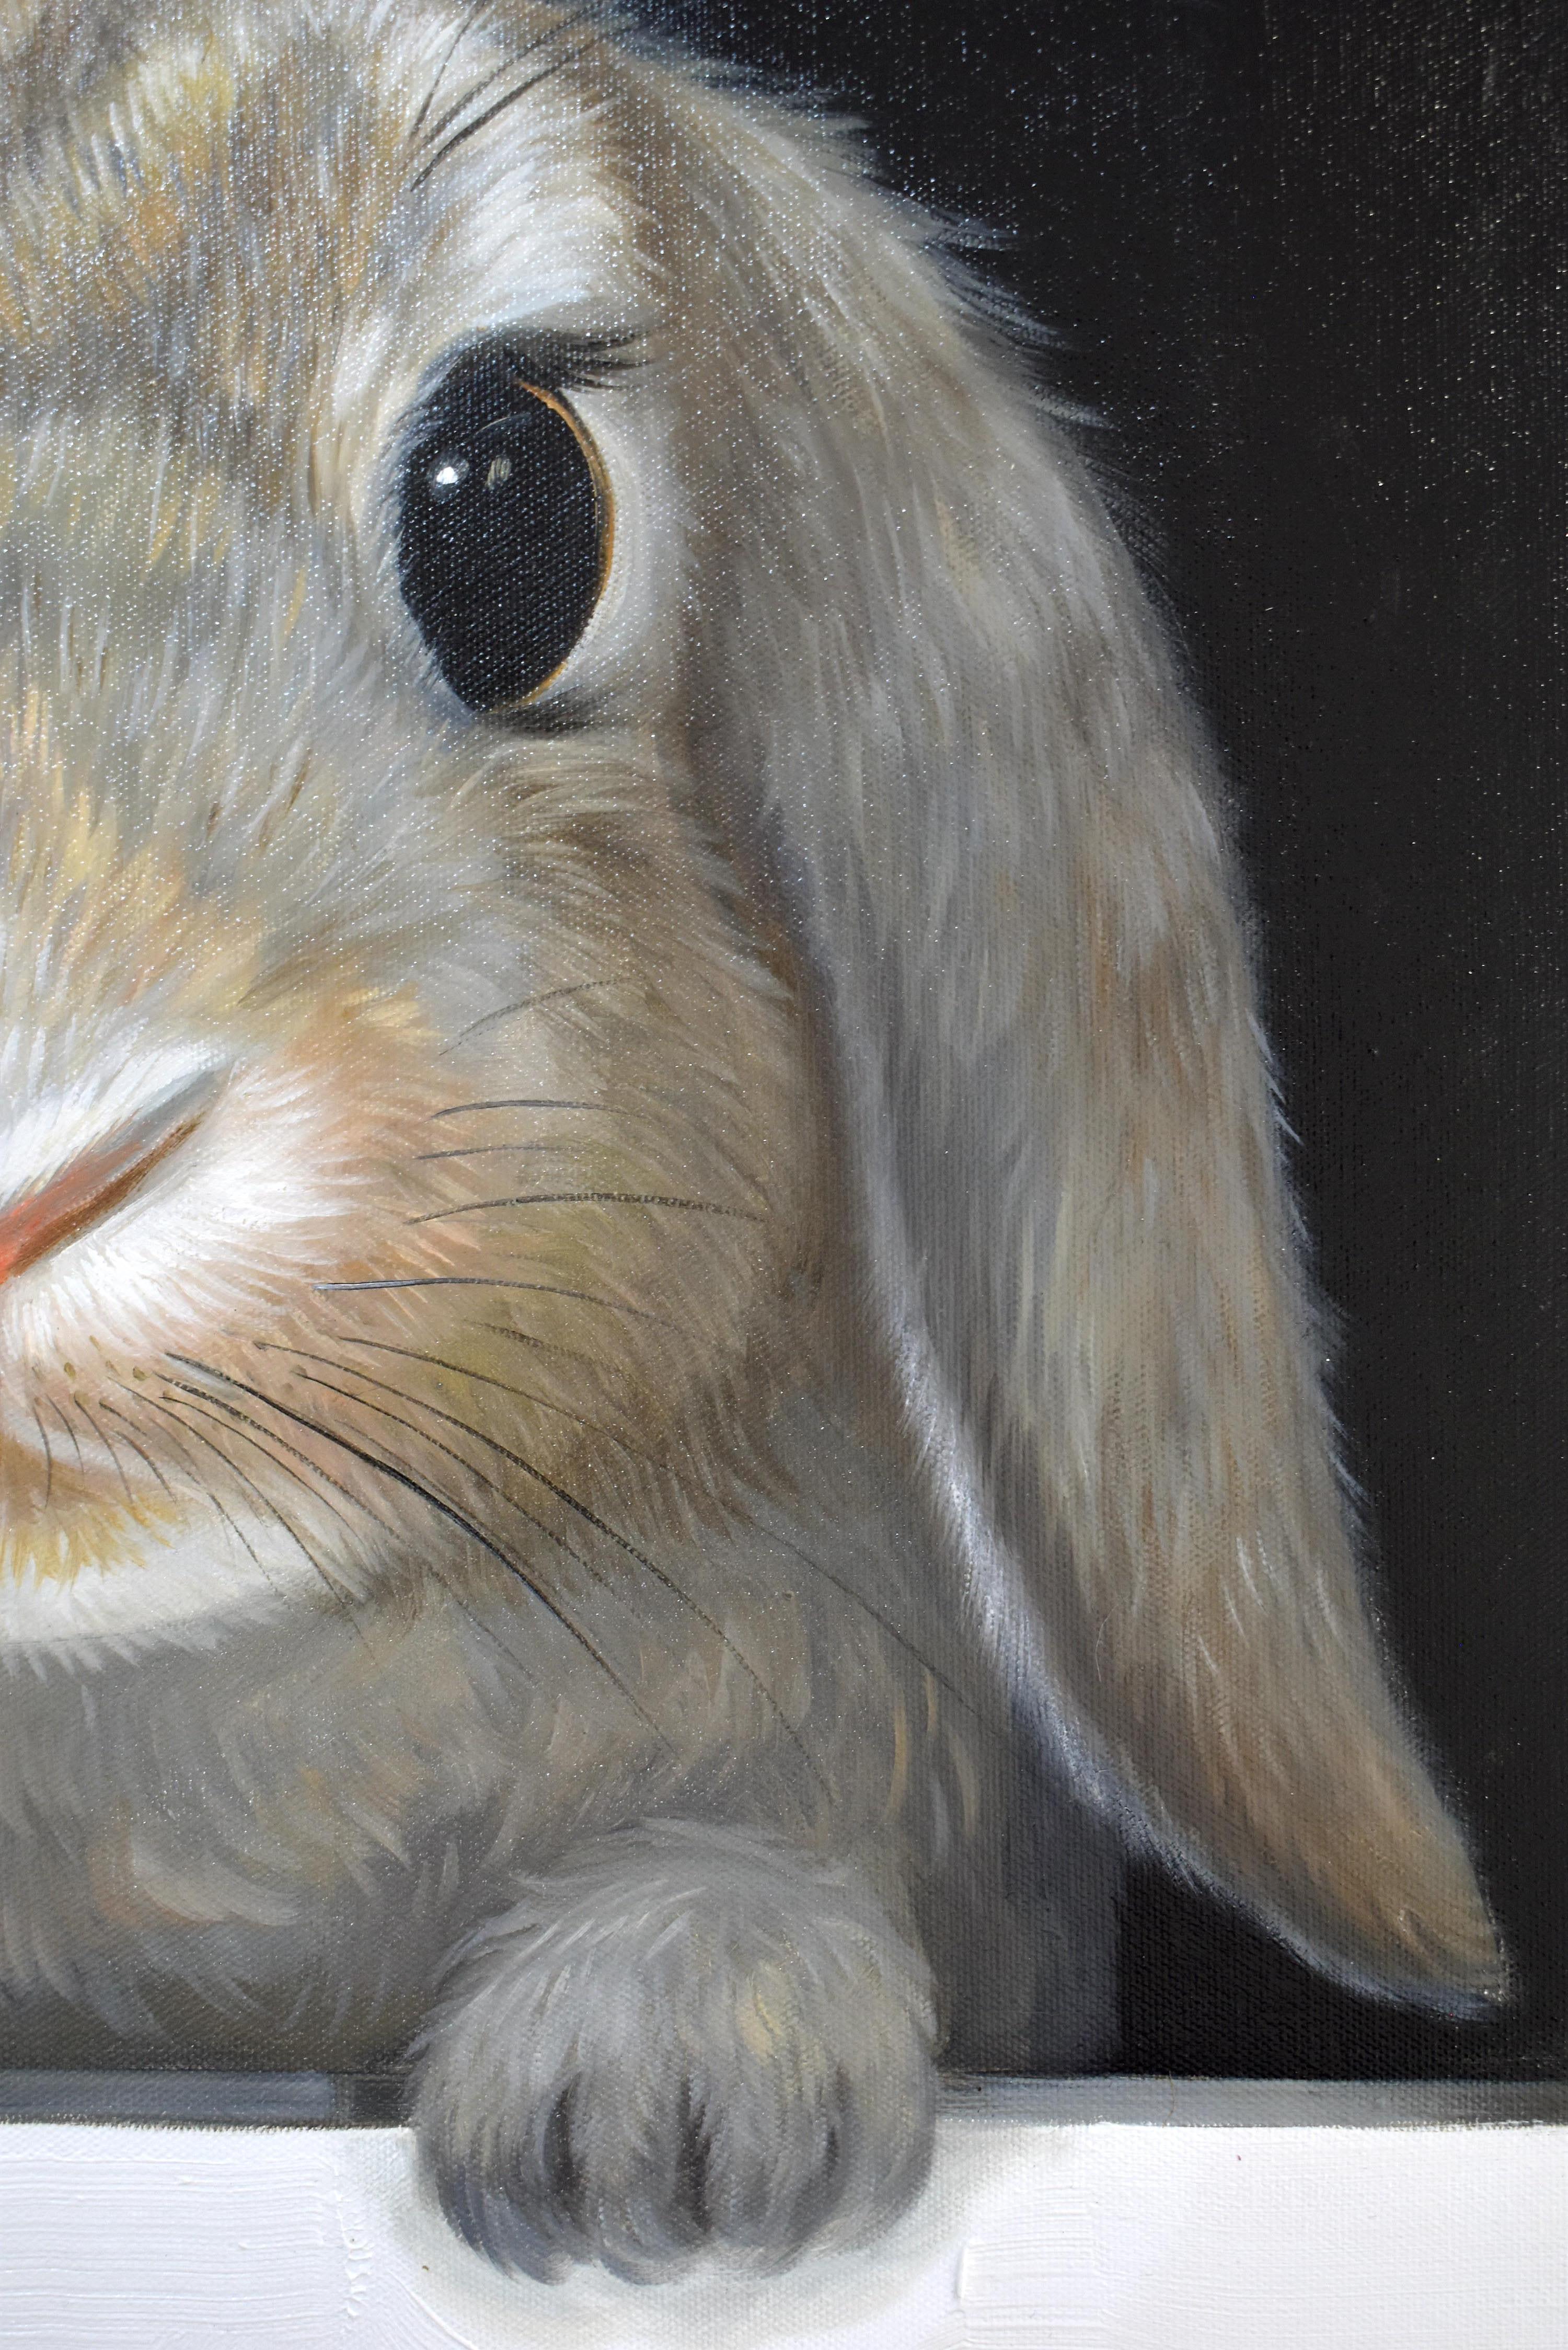 Hare In Hole 7. Rabbit looking Through a Hole. Adorable rabbit Oil painting - Painting by Lingee Bangkhuntod